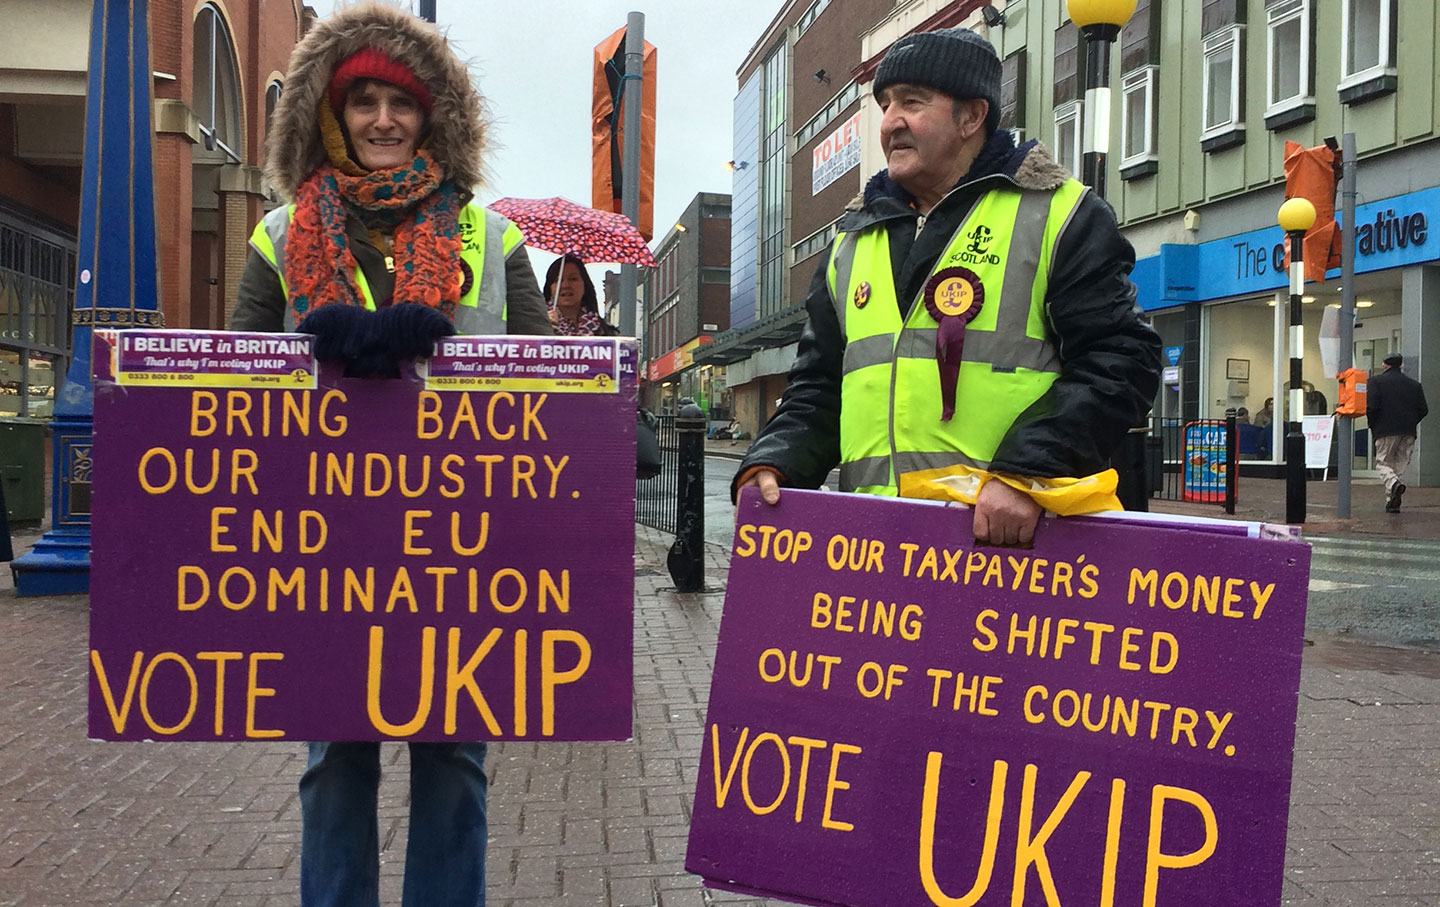 Citizens of Stoke-on-Trent campaigning for UKIP